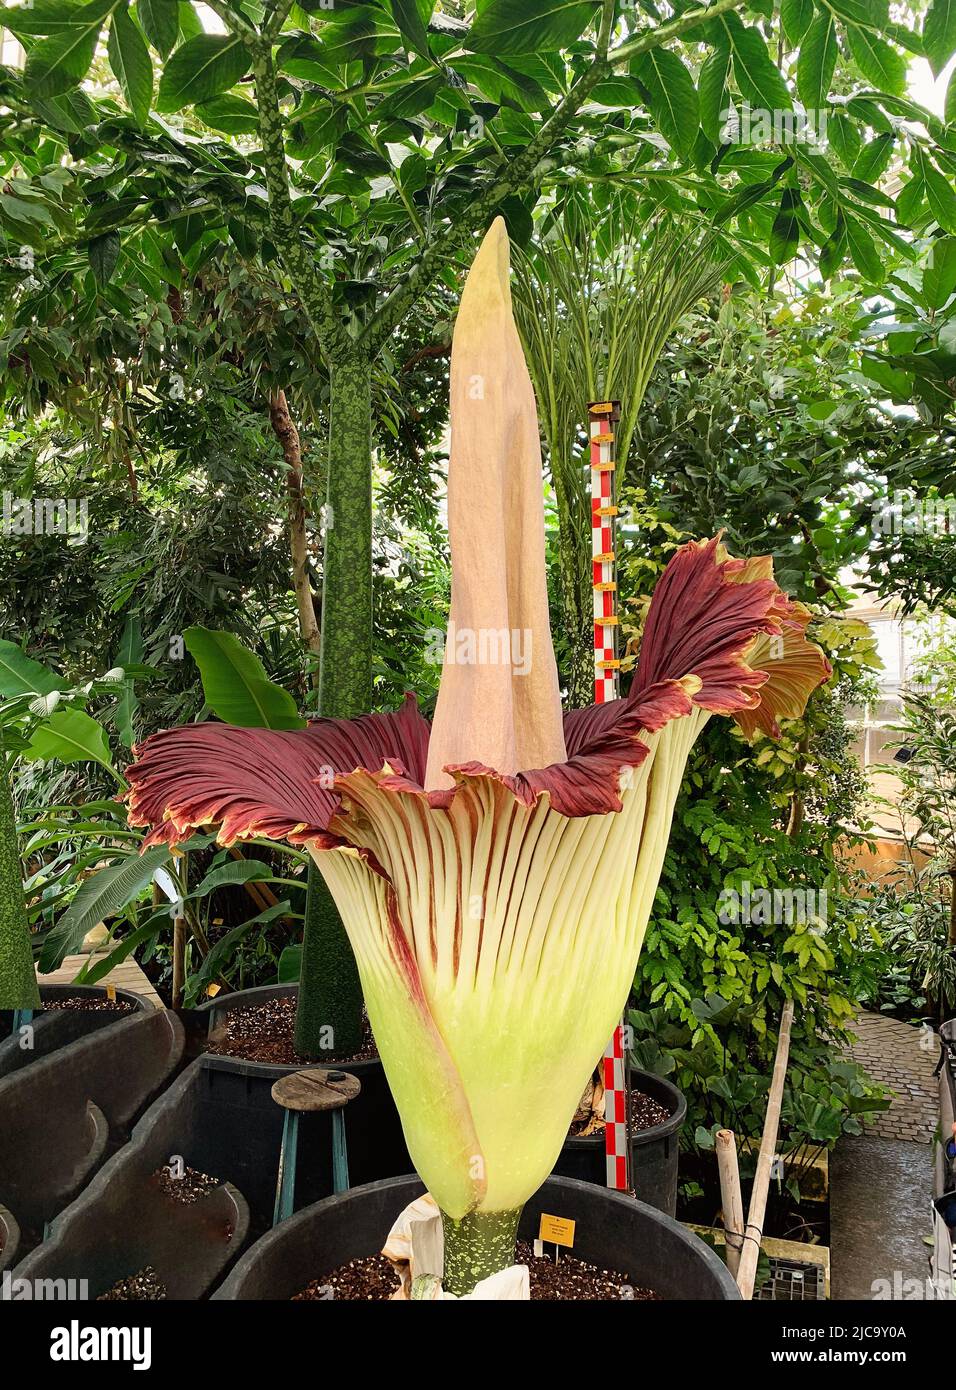 Amorphophallus titanum or Corpse flower in bloom at the Meise Botanical Garden, Brussels, Belgium Stock Photo